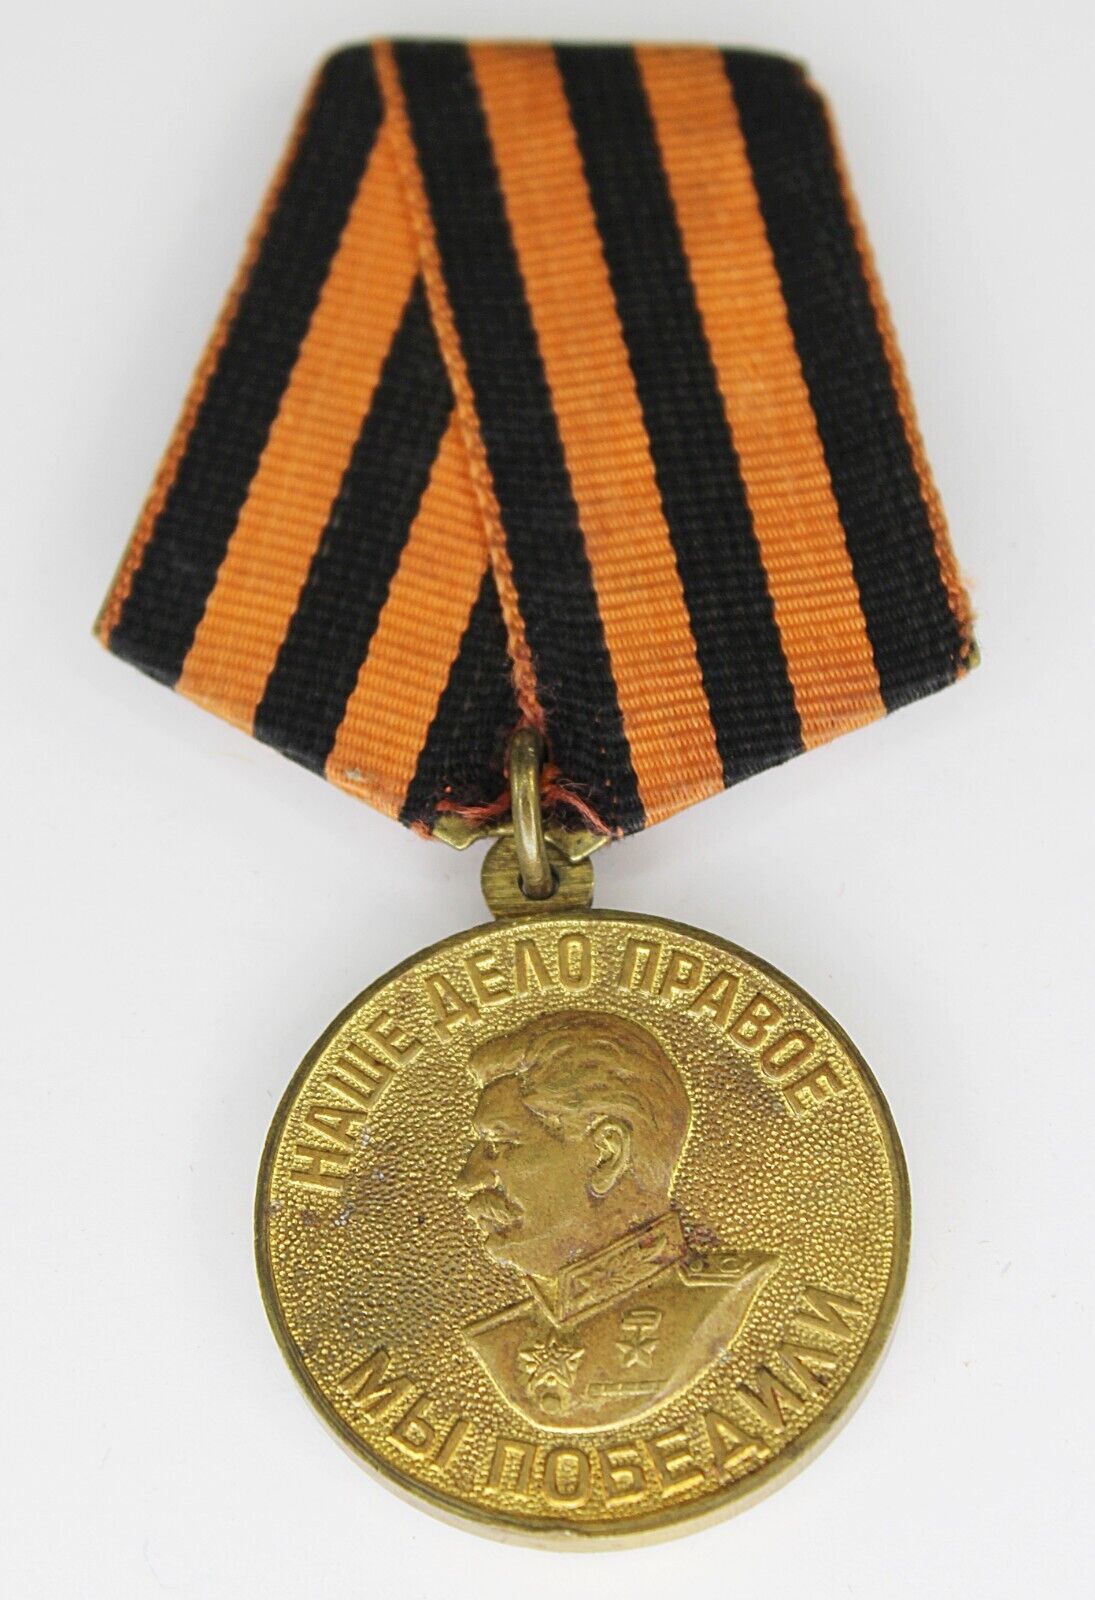 Original Soviet Union Medal Victory Over Germany Medallion with Ribbon